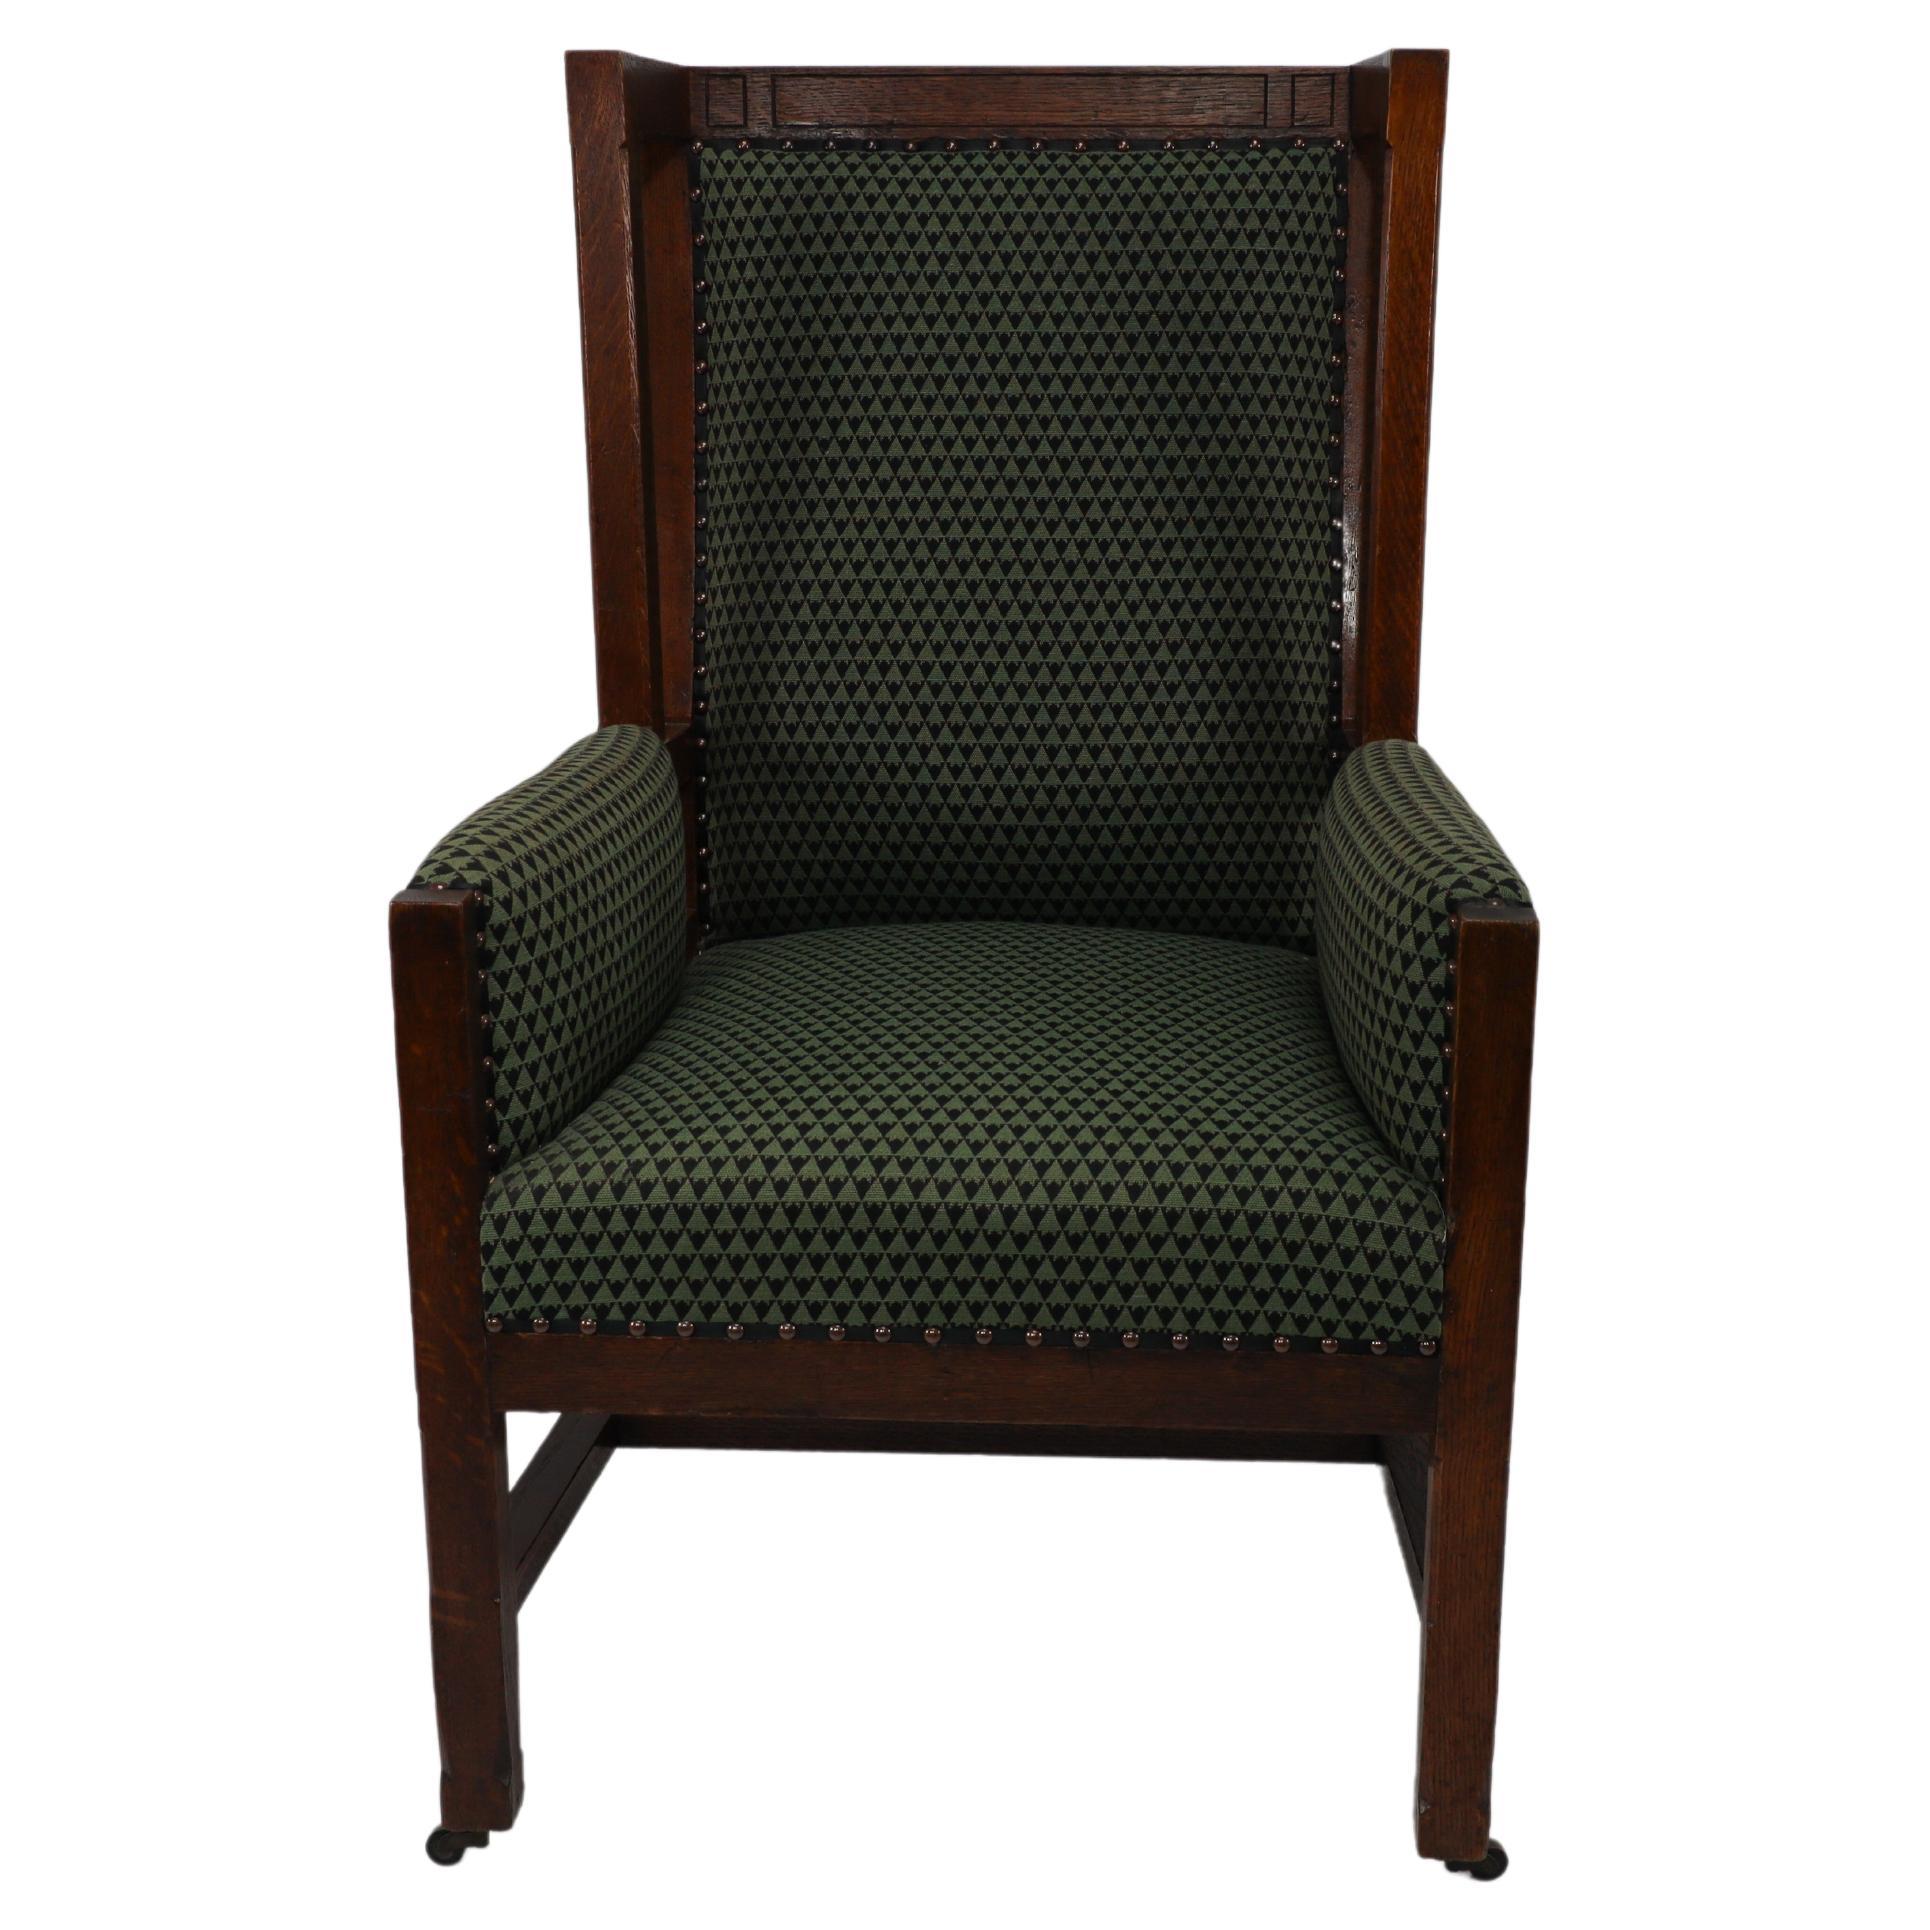 Liberty and Co, attributed, in the style of Leonard Wyburd. An Arts and Crafts oak wing back armchair with unusual upper open sides. The back supports curve down through to the back legs. The forward part of the wings follow down through the arms